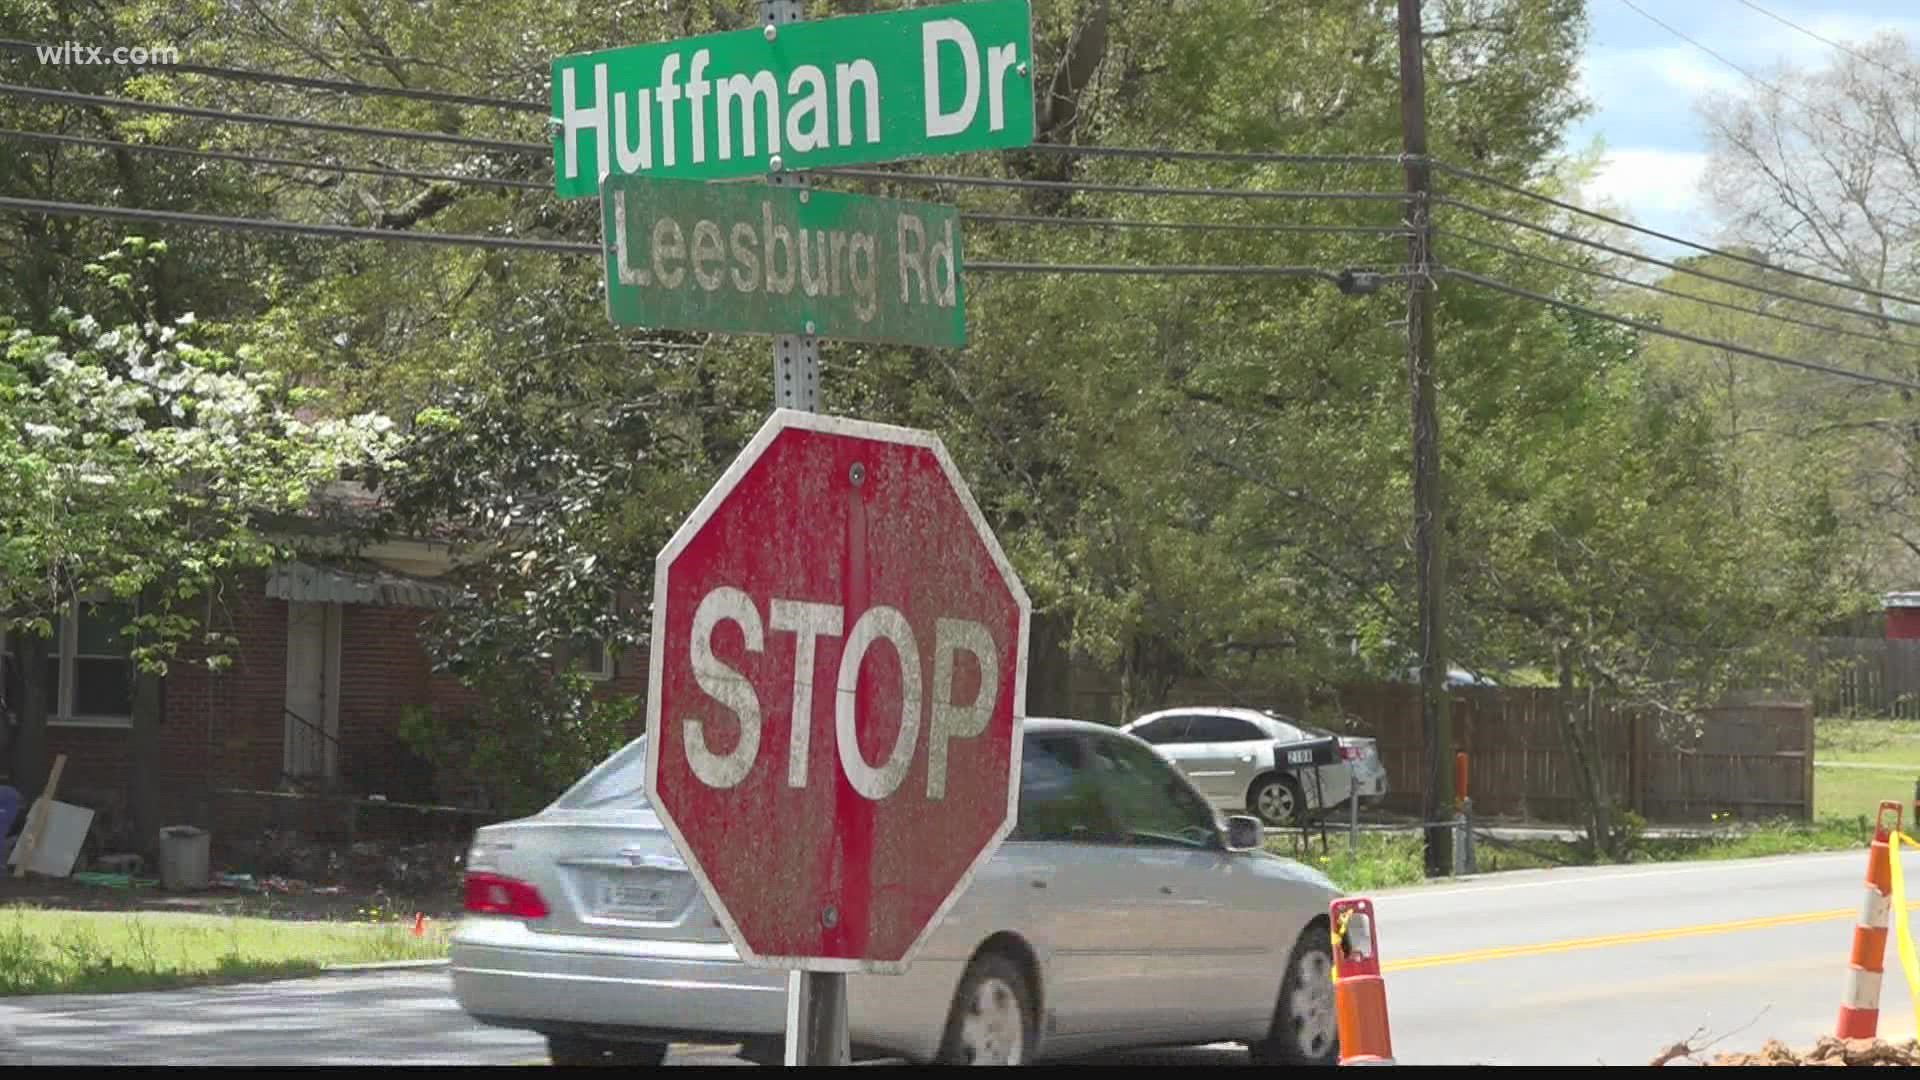 After a decade of planning, the widening of Leesburg Road has begun.